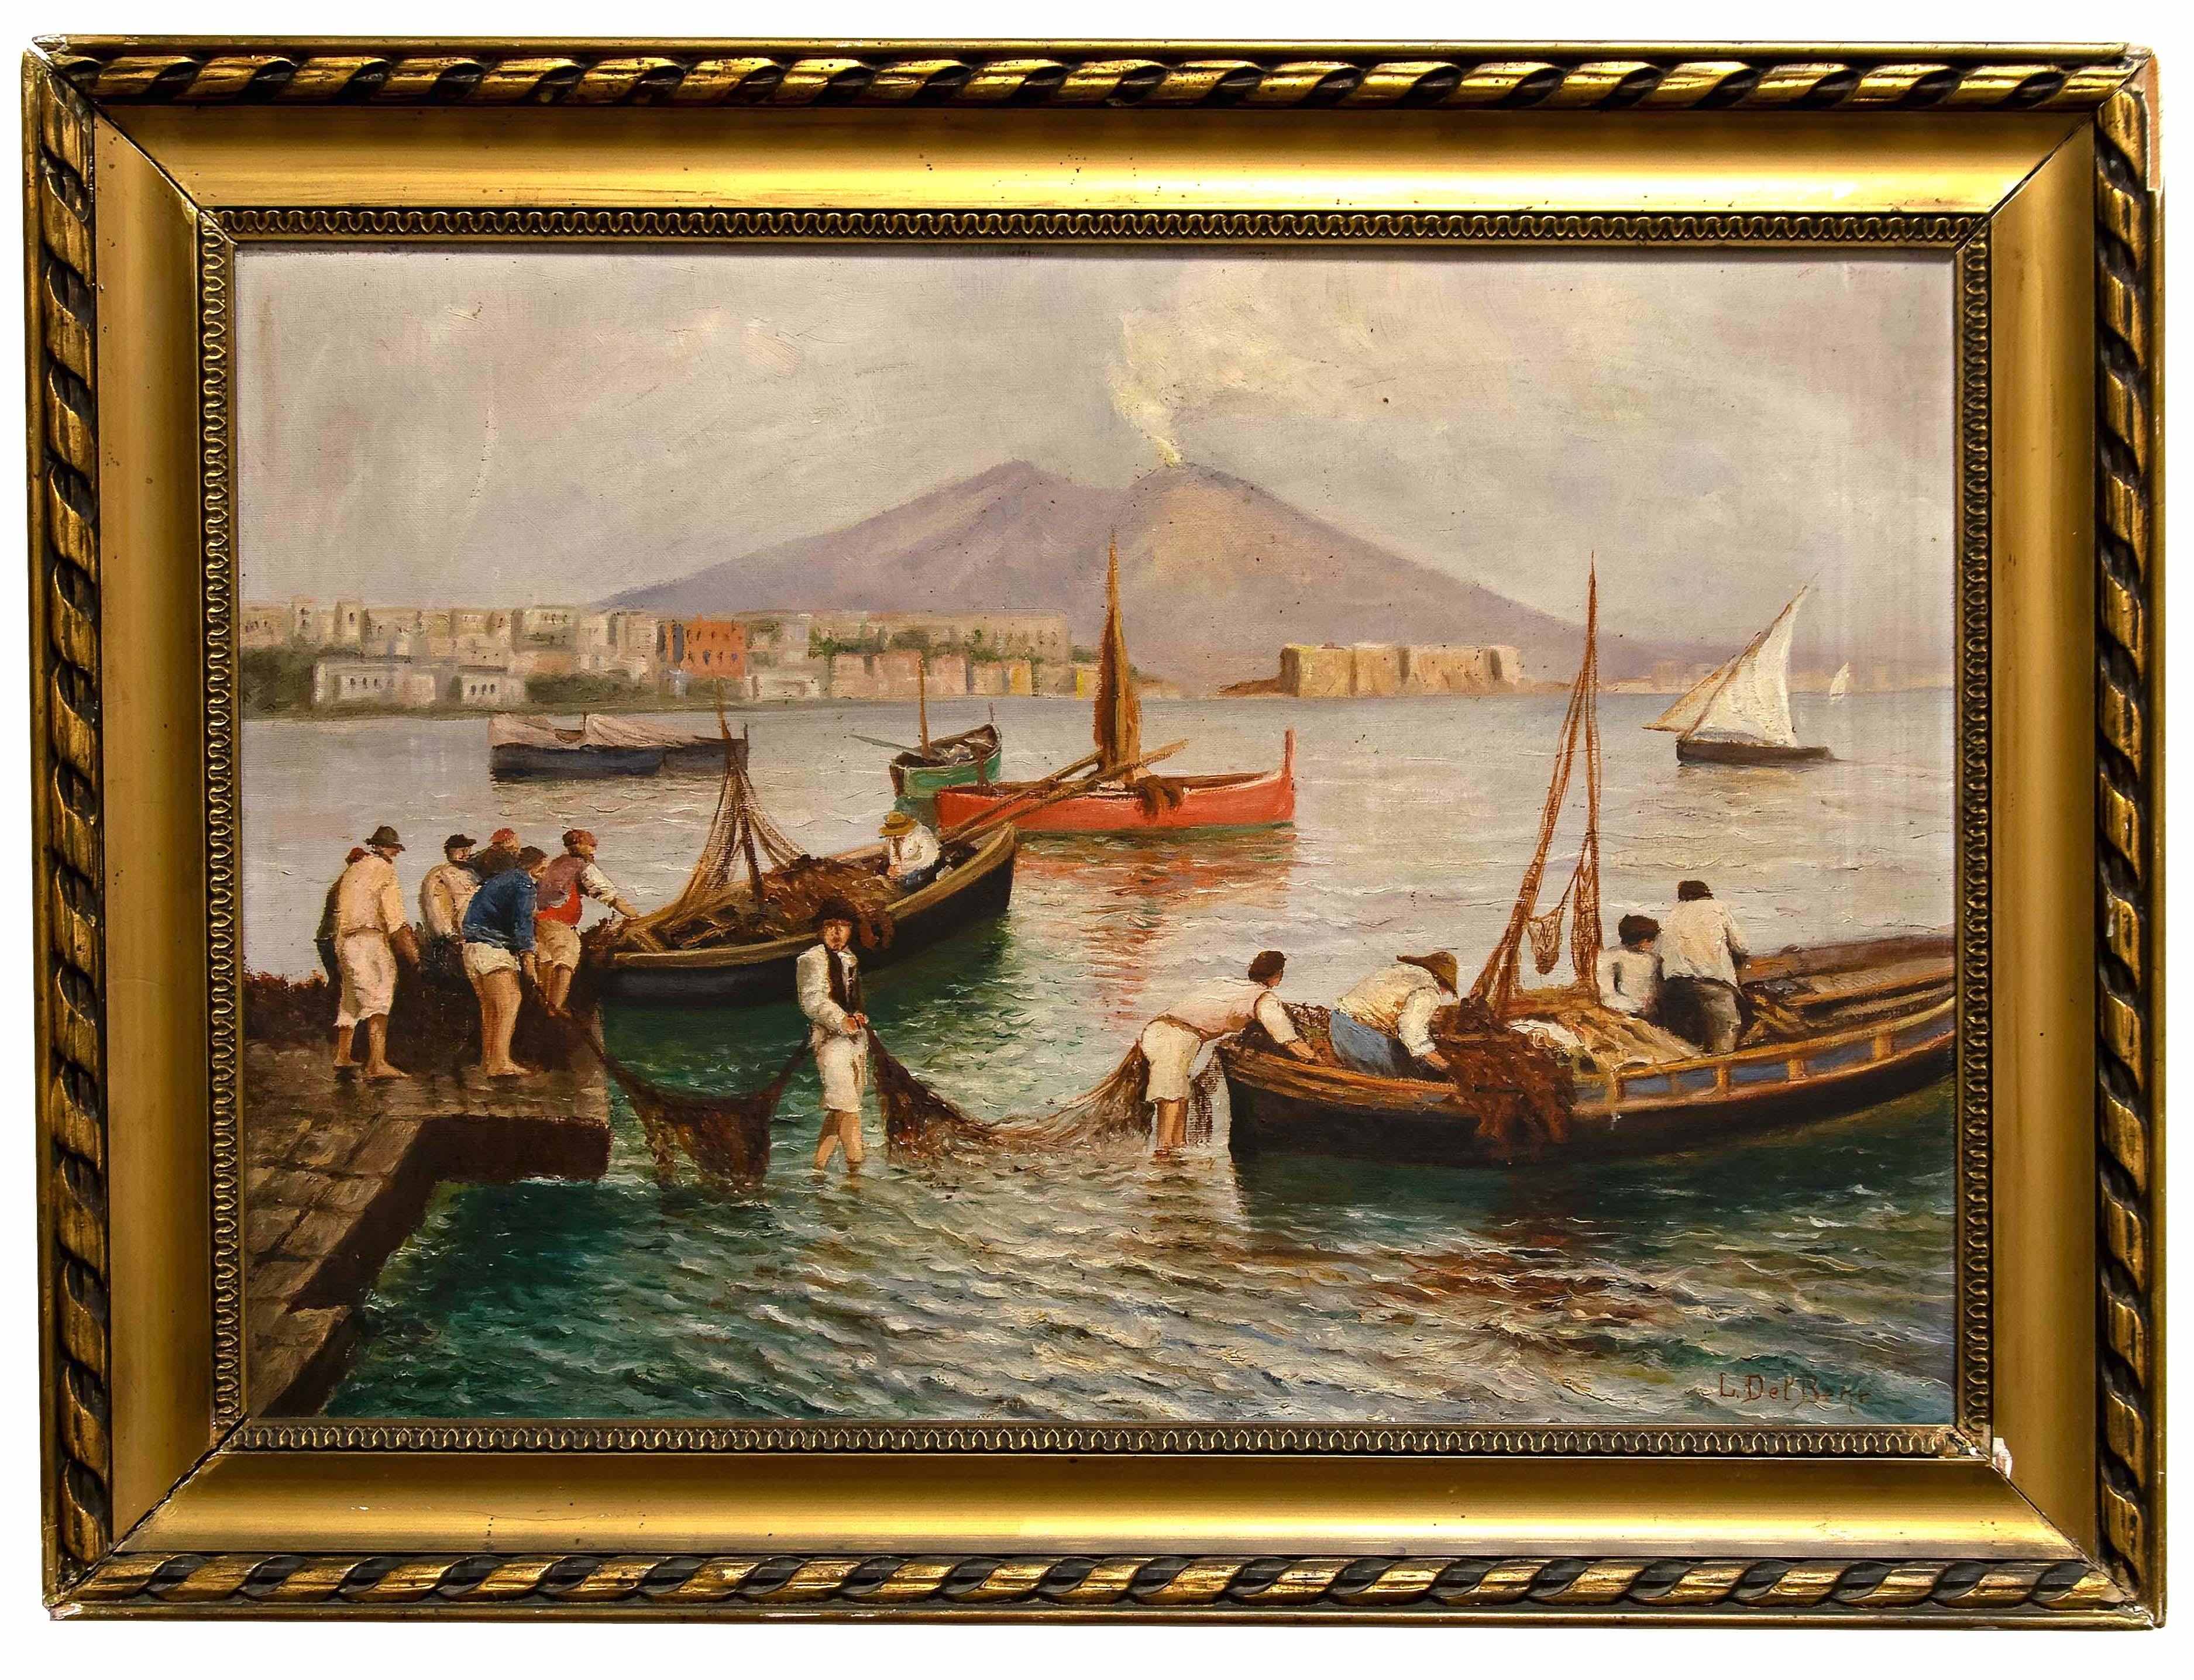 Fishermen on the Seashore - Oil on Canvas by Neapolitan Master Early 1900